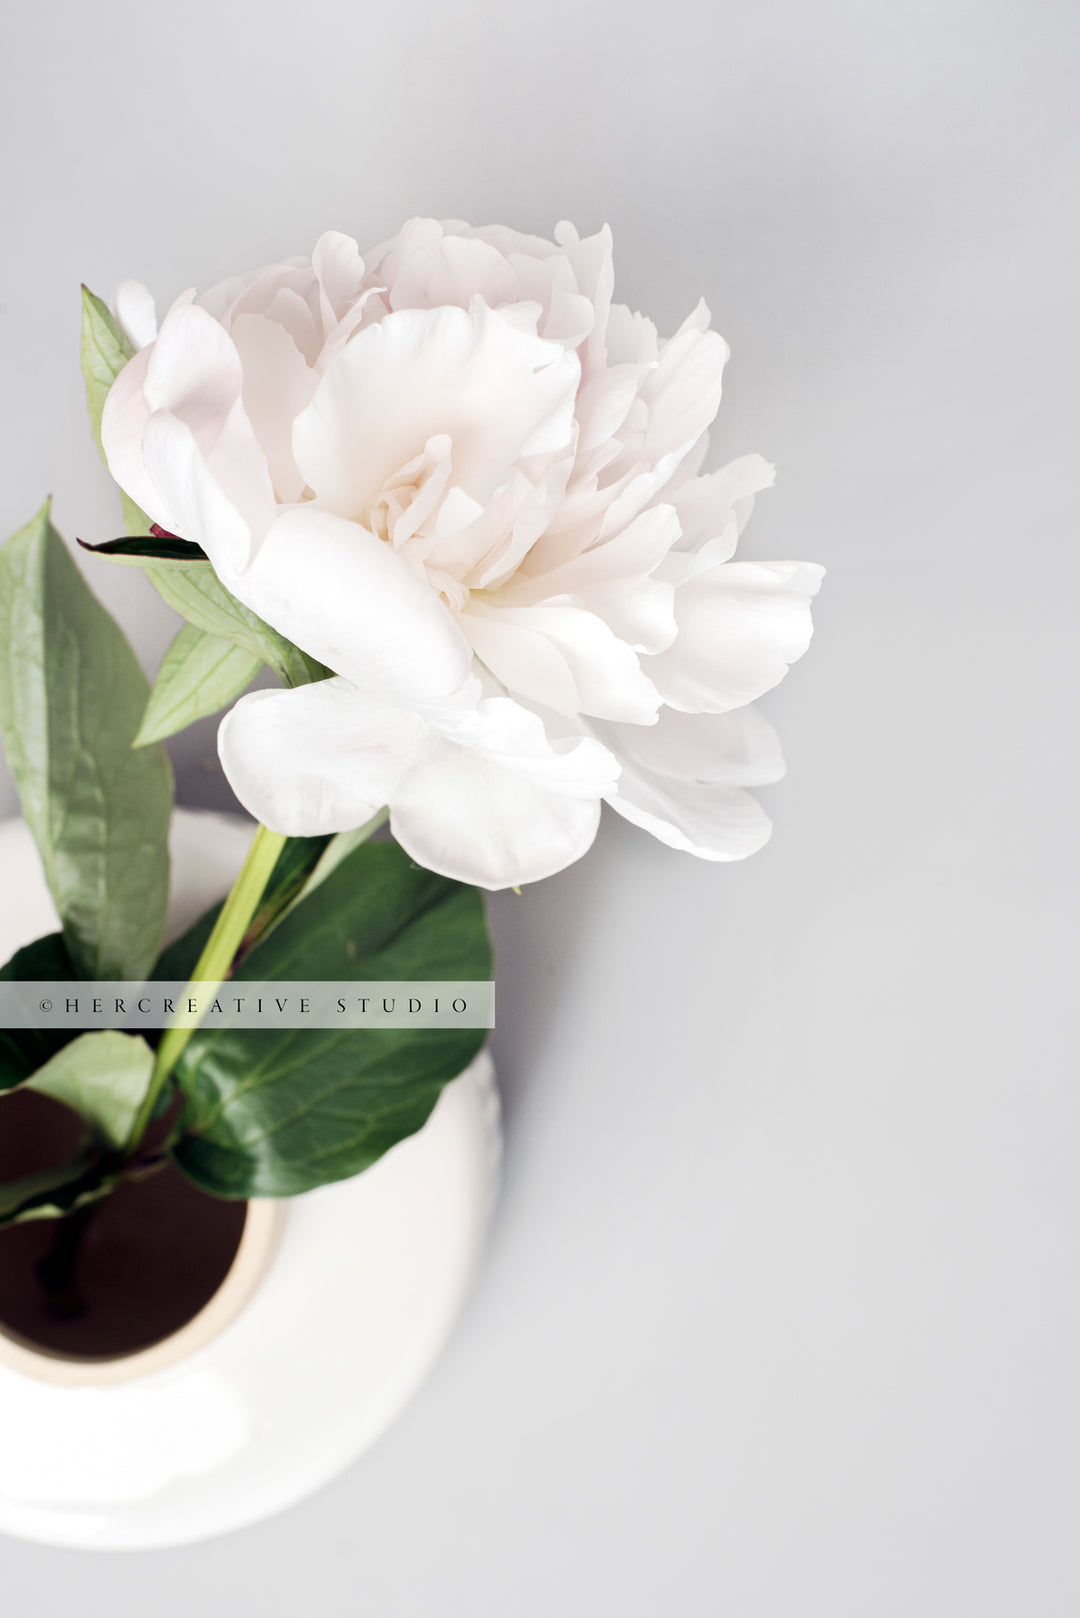 Peony in a vase on Grey Background. Stock Image